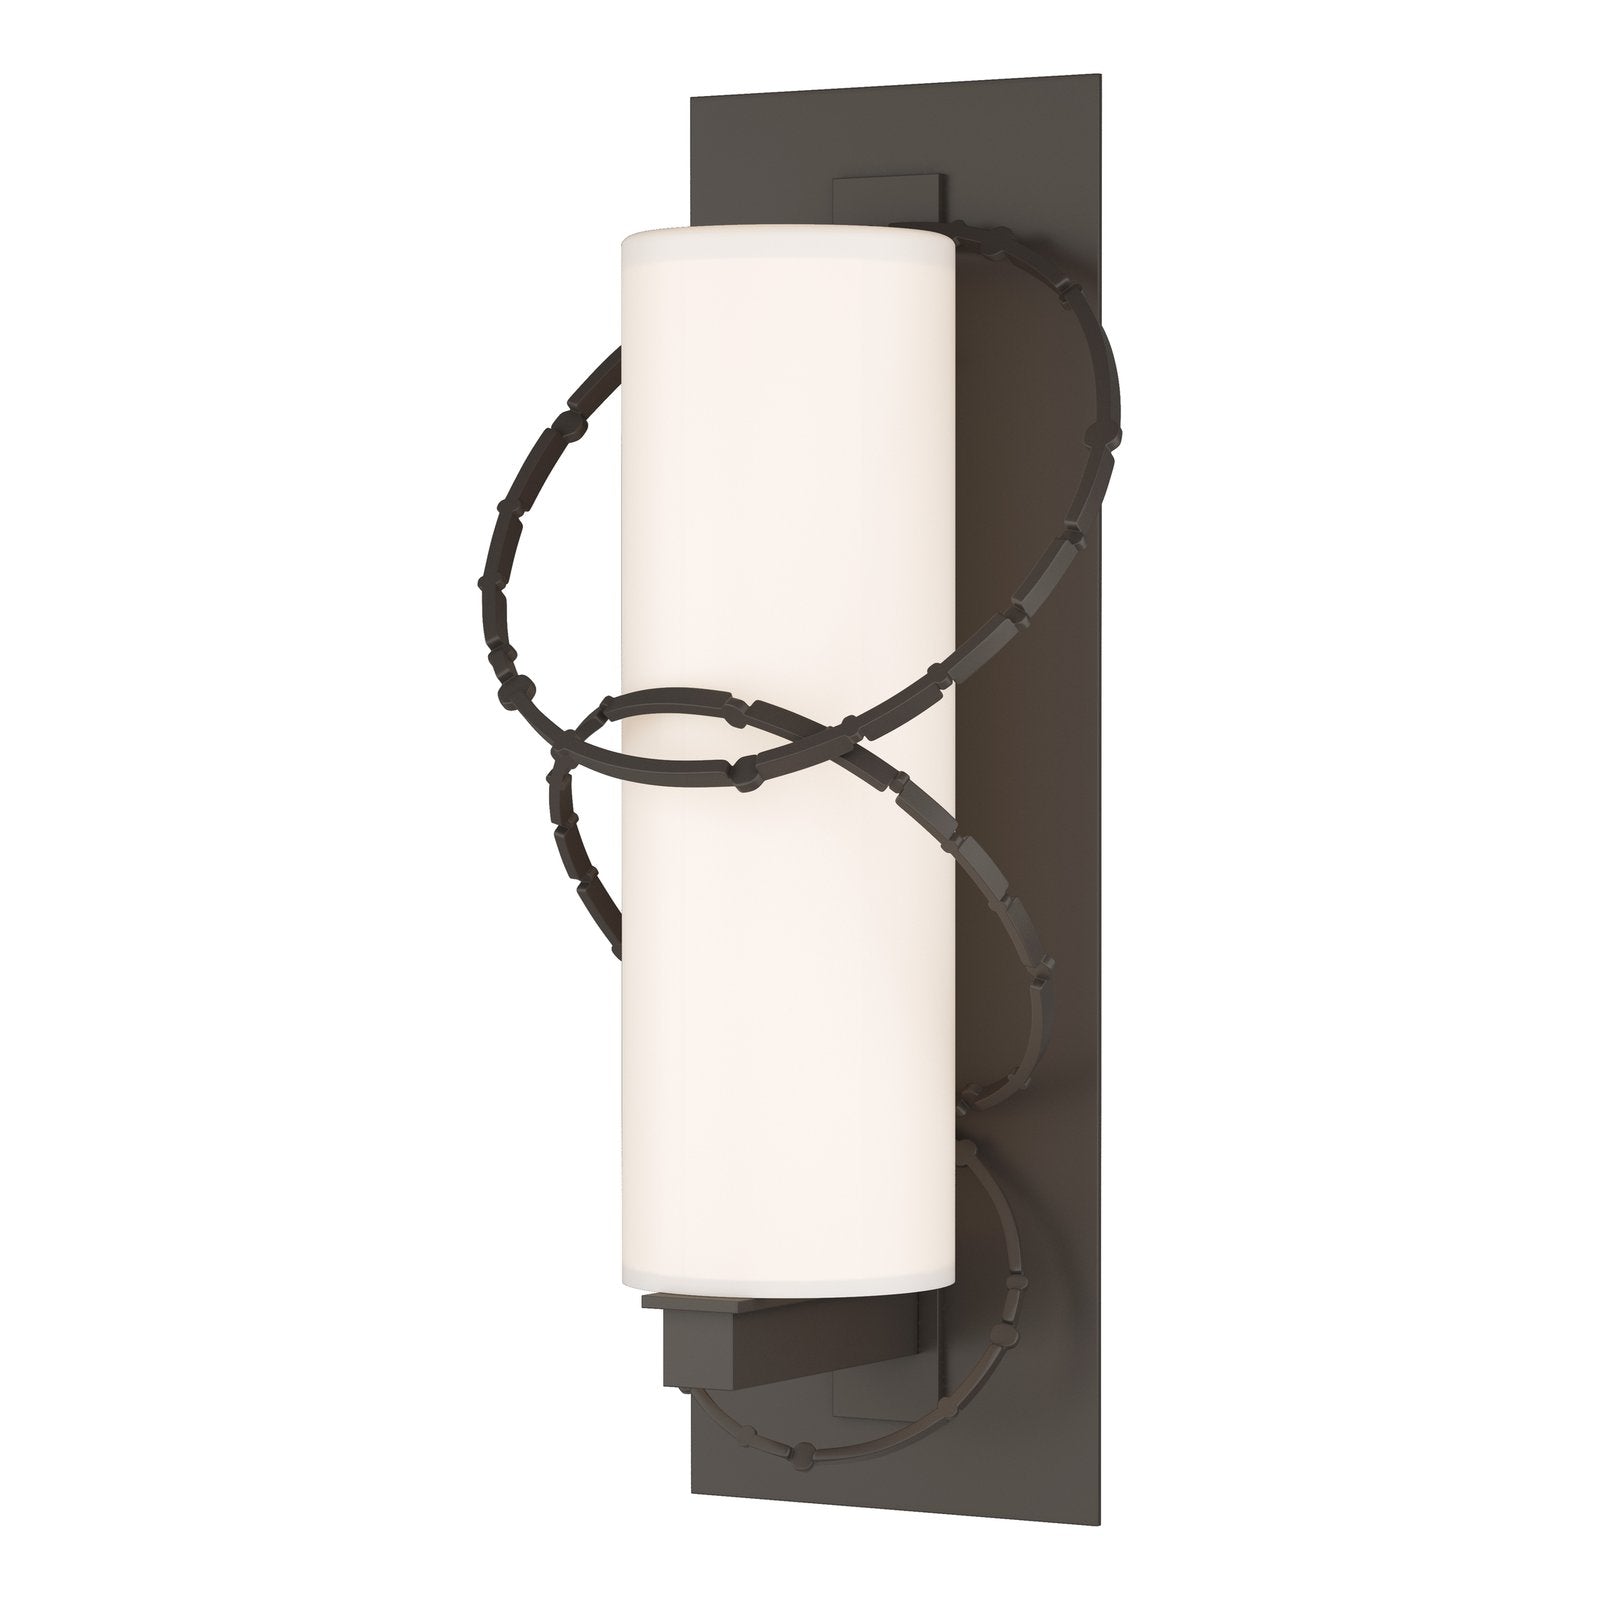 Hubbardton Forge Olympus Large Outdoor Sconce Outdoor l Wall Hubbardton Forge Coastal Dark Smoke  